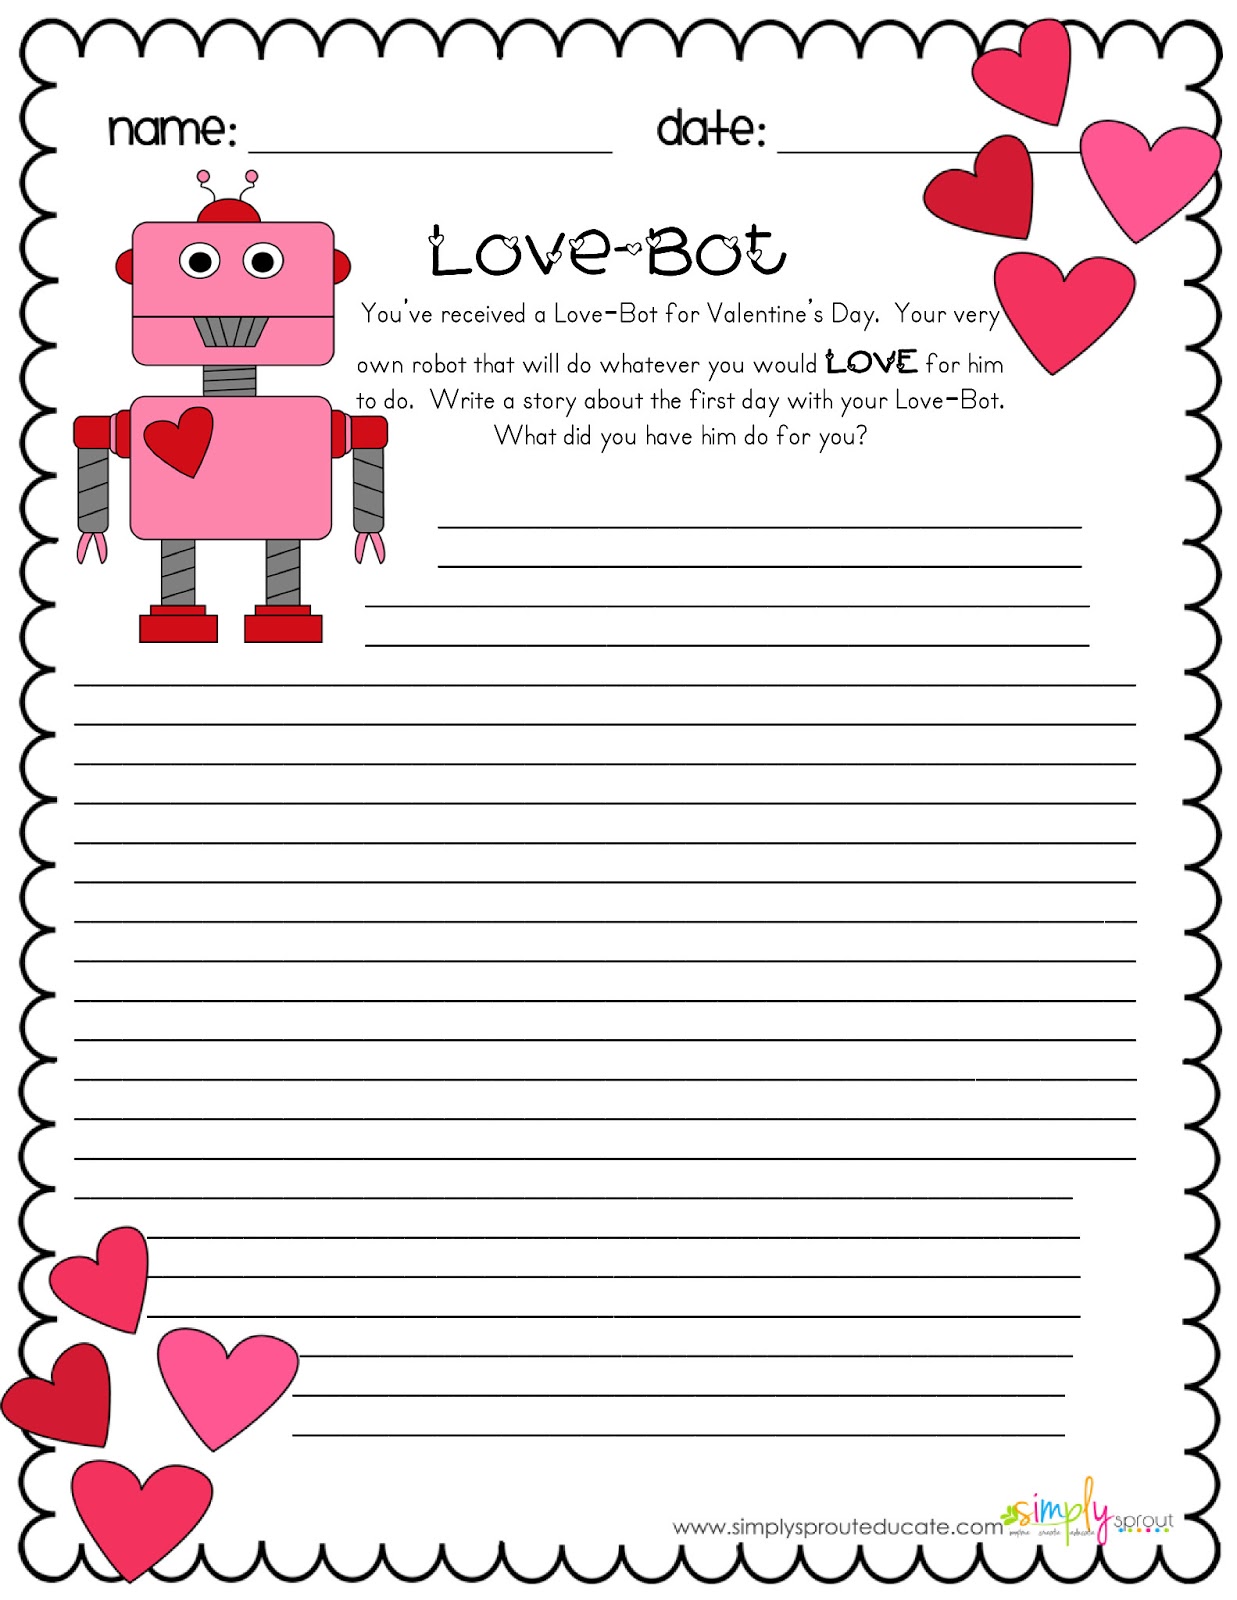 Valentines Day History Worksheets - Click the buttons to print each